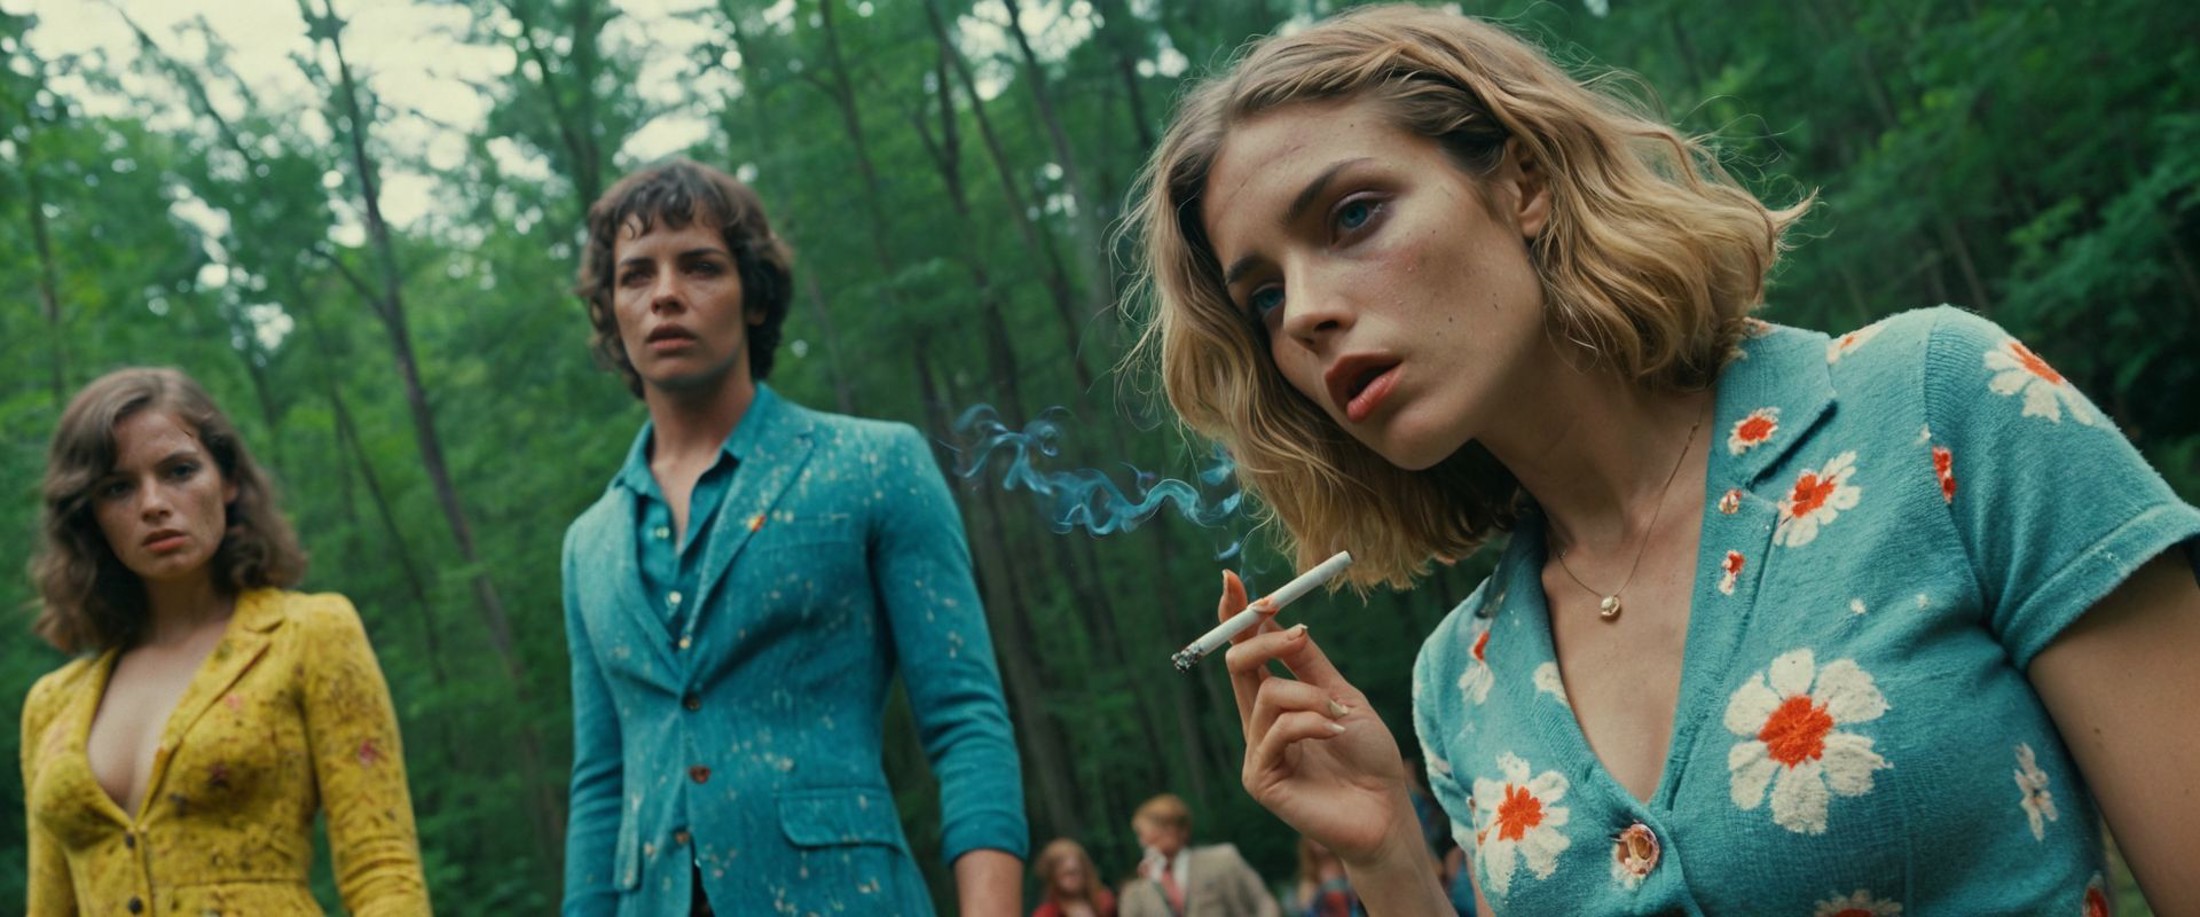 fantasy theme, raw, empathic movie still,Woodstock's people, sexy woman with floral dress, smoking , vintage suits, knitti...